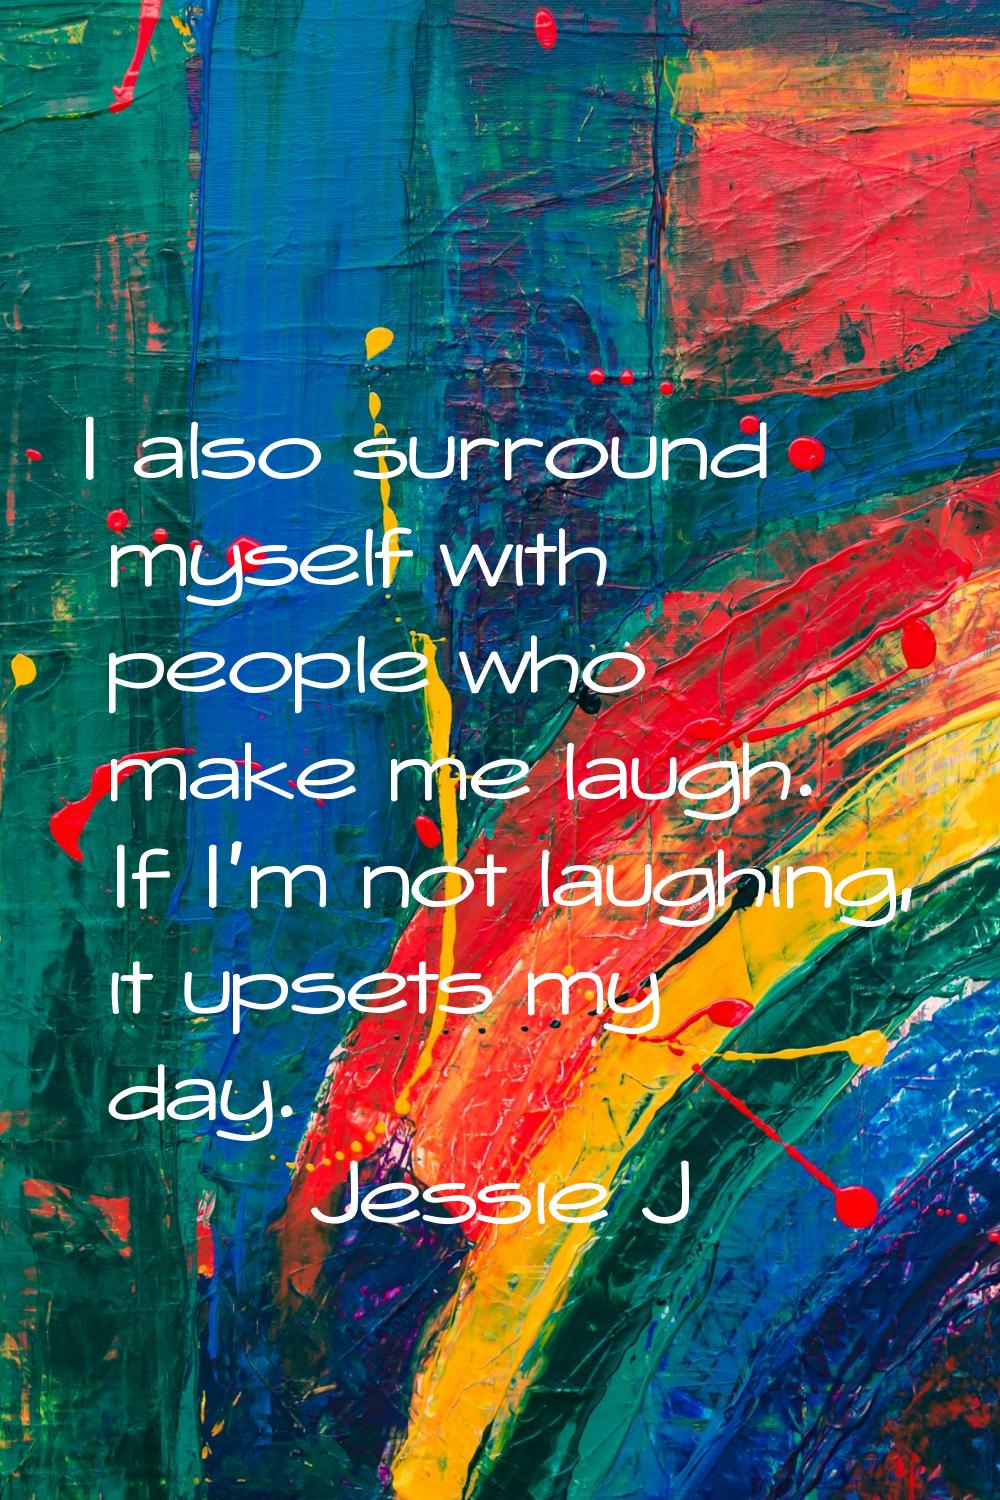 I also surround myself with people who make me laugh. If I'm not laughing, it upsets my day.